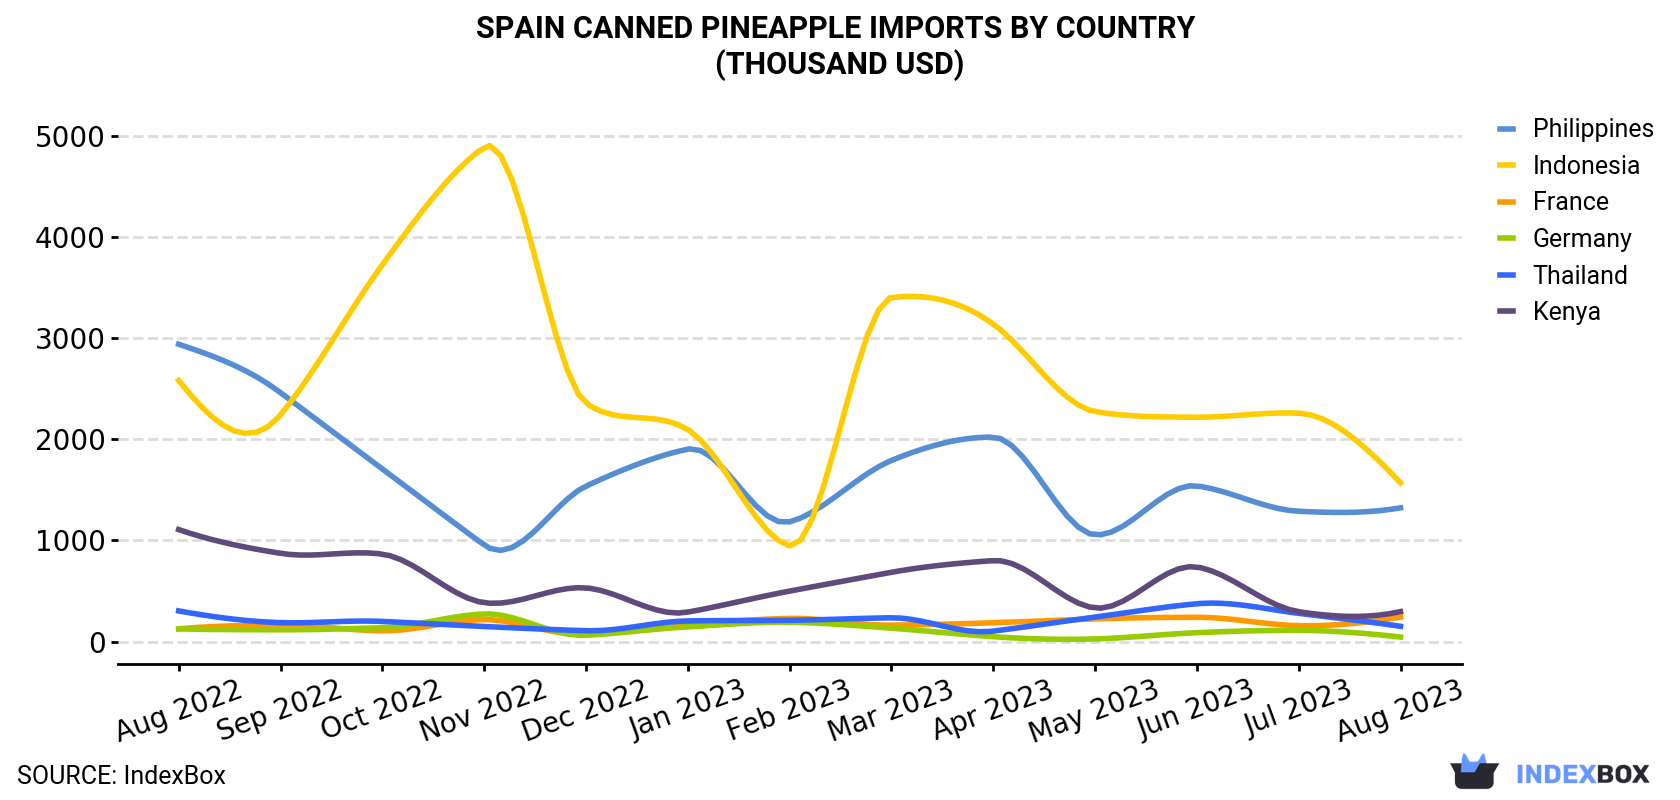 Spain Canned Pineapple Imports By Country (Thousand USD)